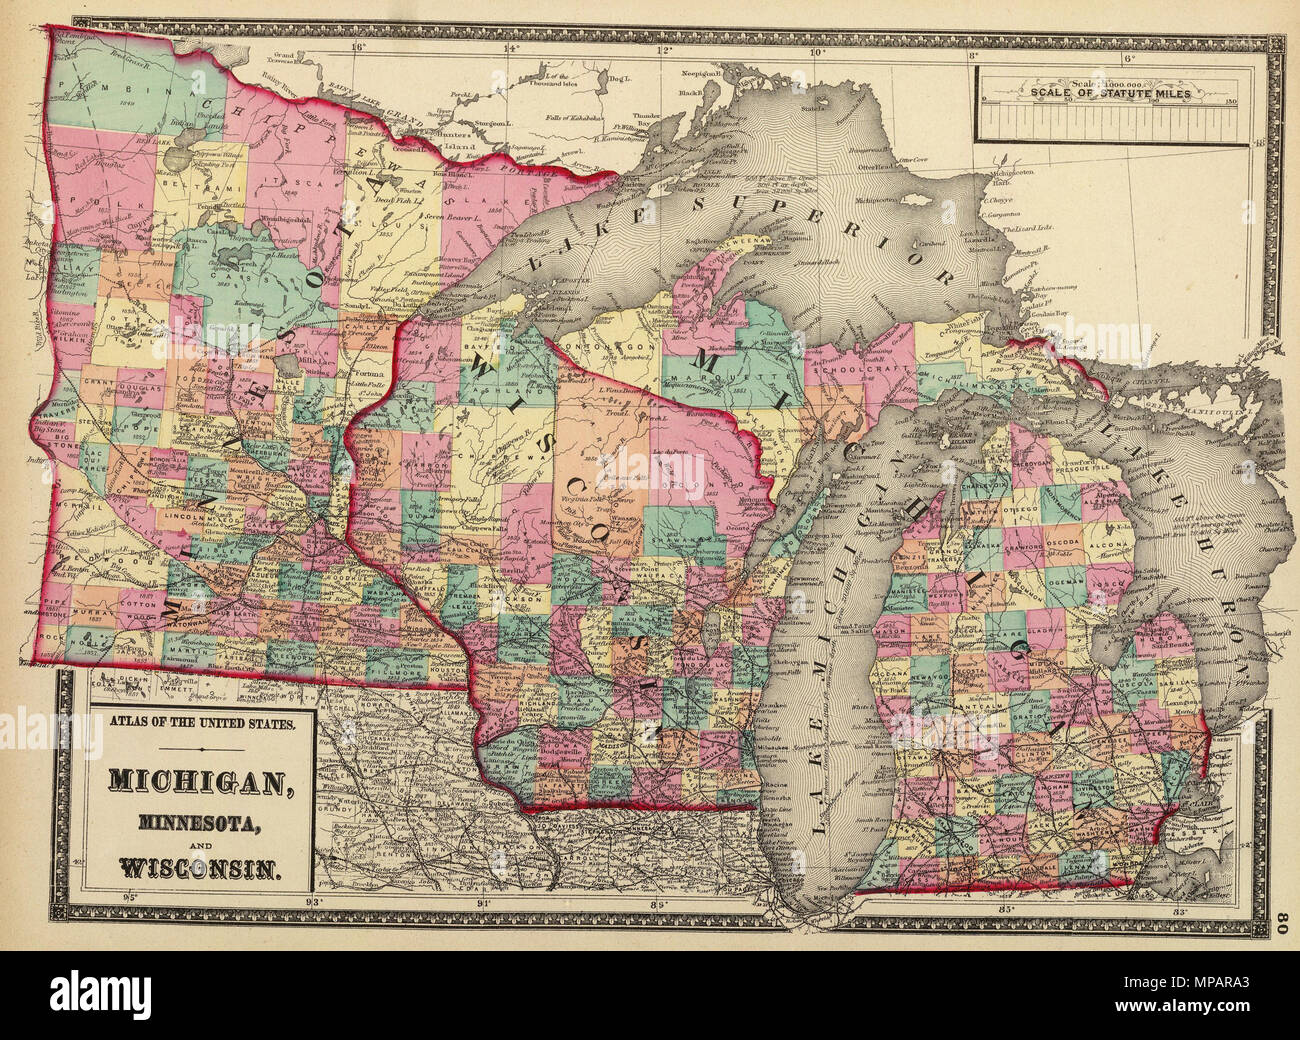 map of wisconsin and michigan English 1872 Map Of The States Of Minnesota Wisconsin And map of wisconsin and michigan